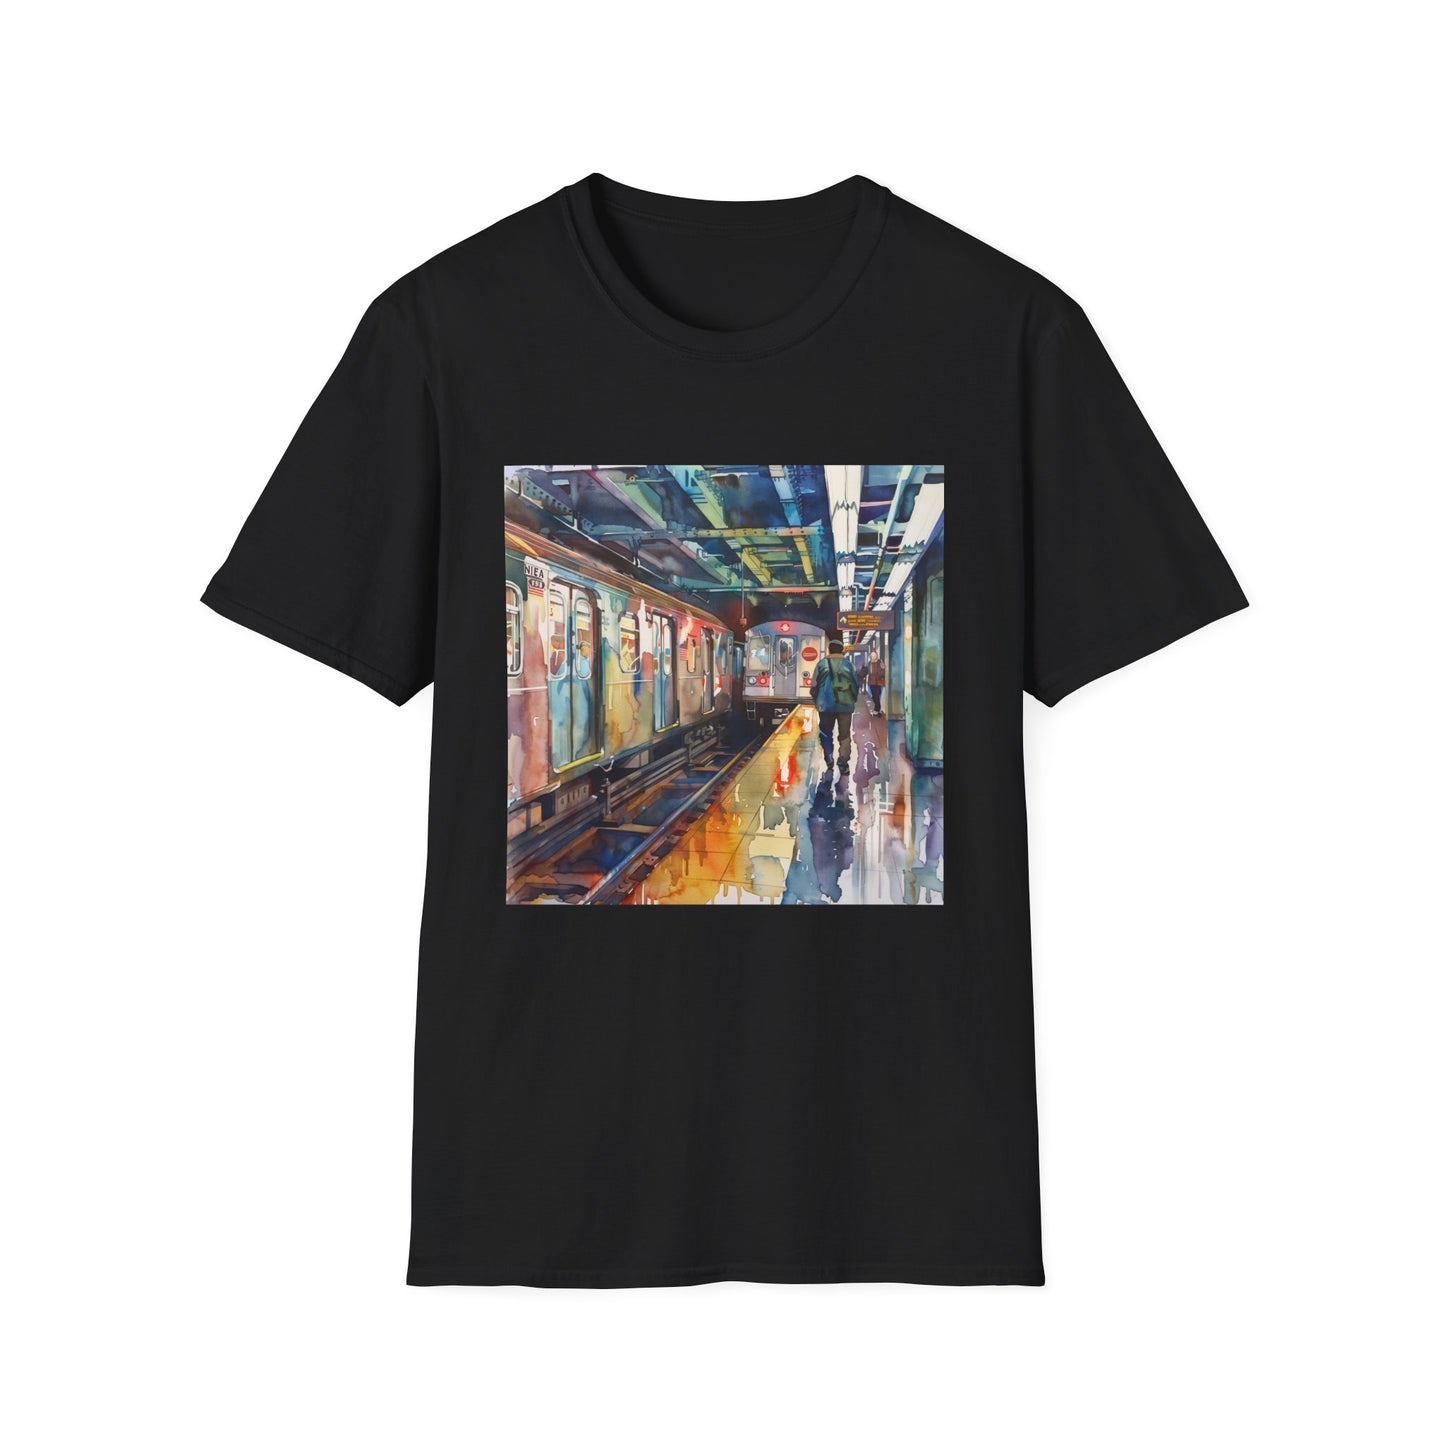 ## Urban Odyssey in Watercolor: The New York Subway T-shirt